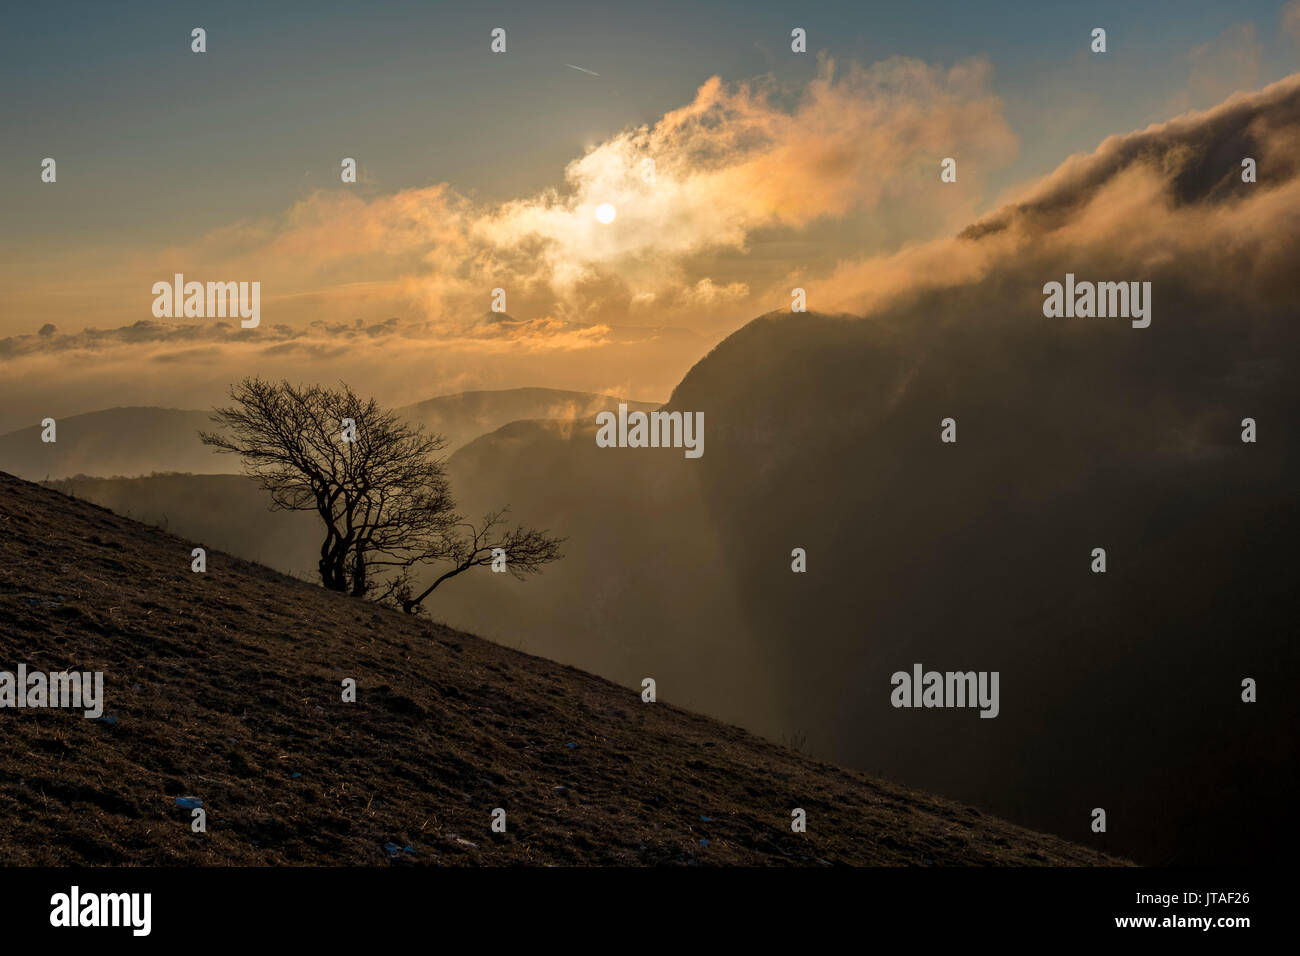 Sunrise on a lonely tree on mountain Motette, Apennines, Umbria, Italy, Europe Stock Photo